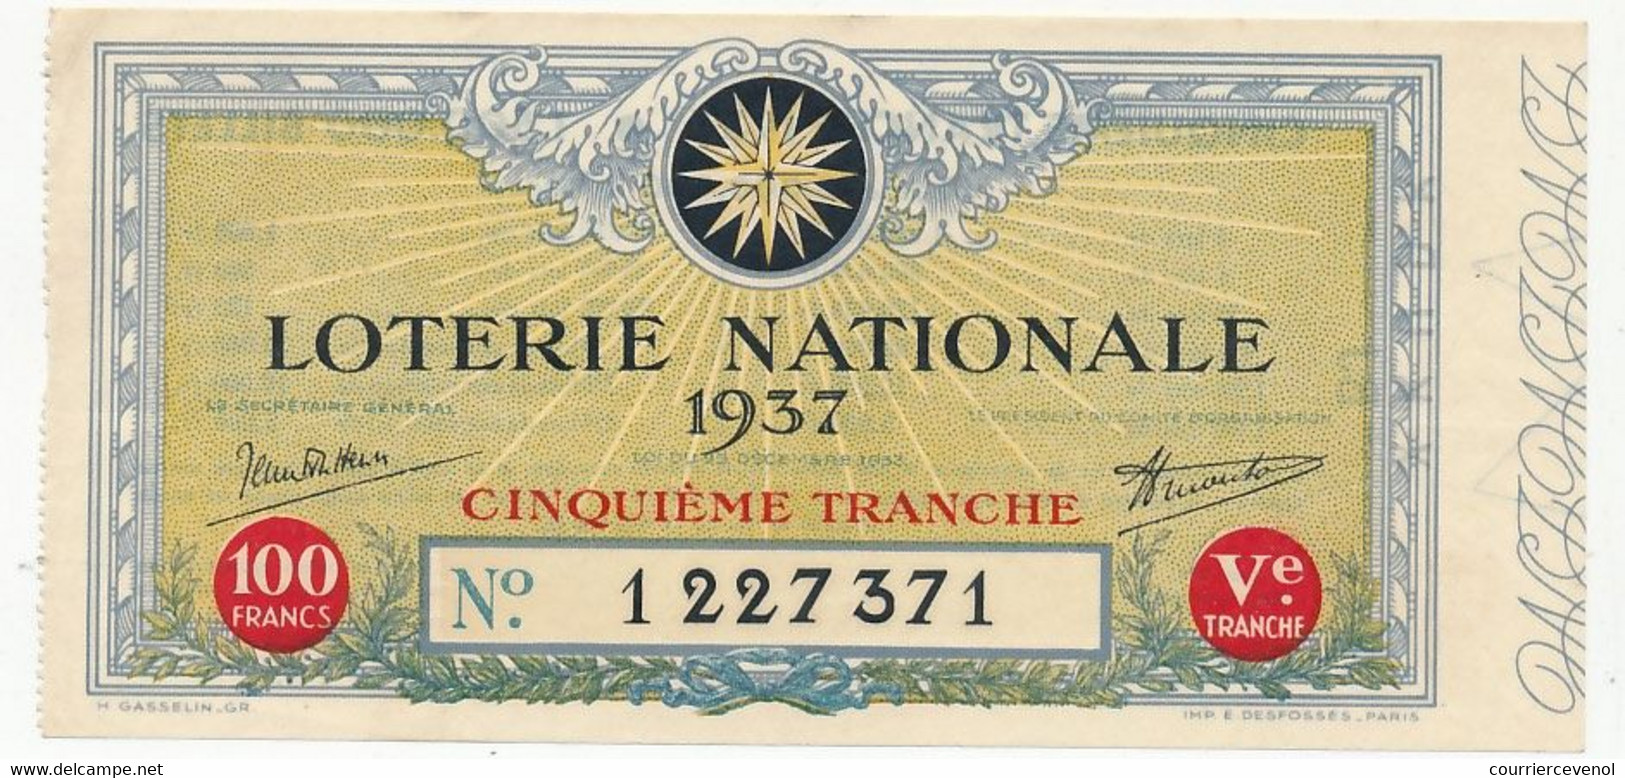 FRANCE - Loterie Nationale - Billet Entier - 5eme Tranche 1937 - Lottery Tickets